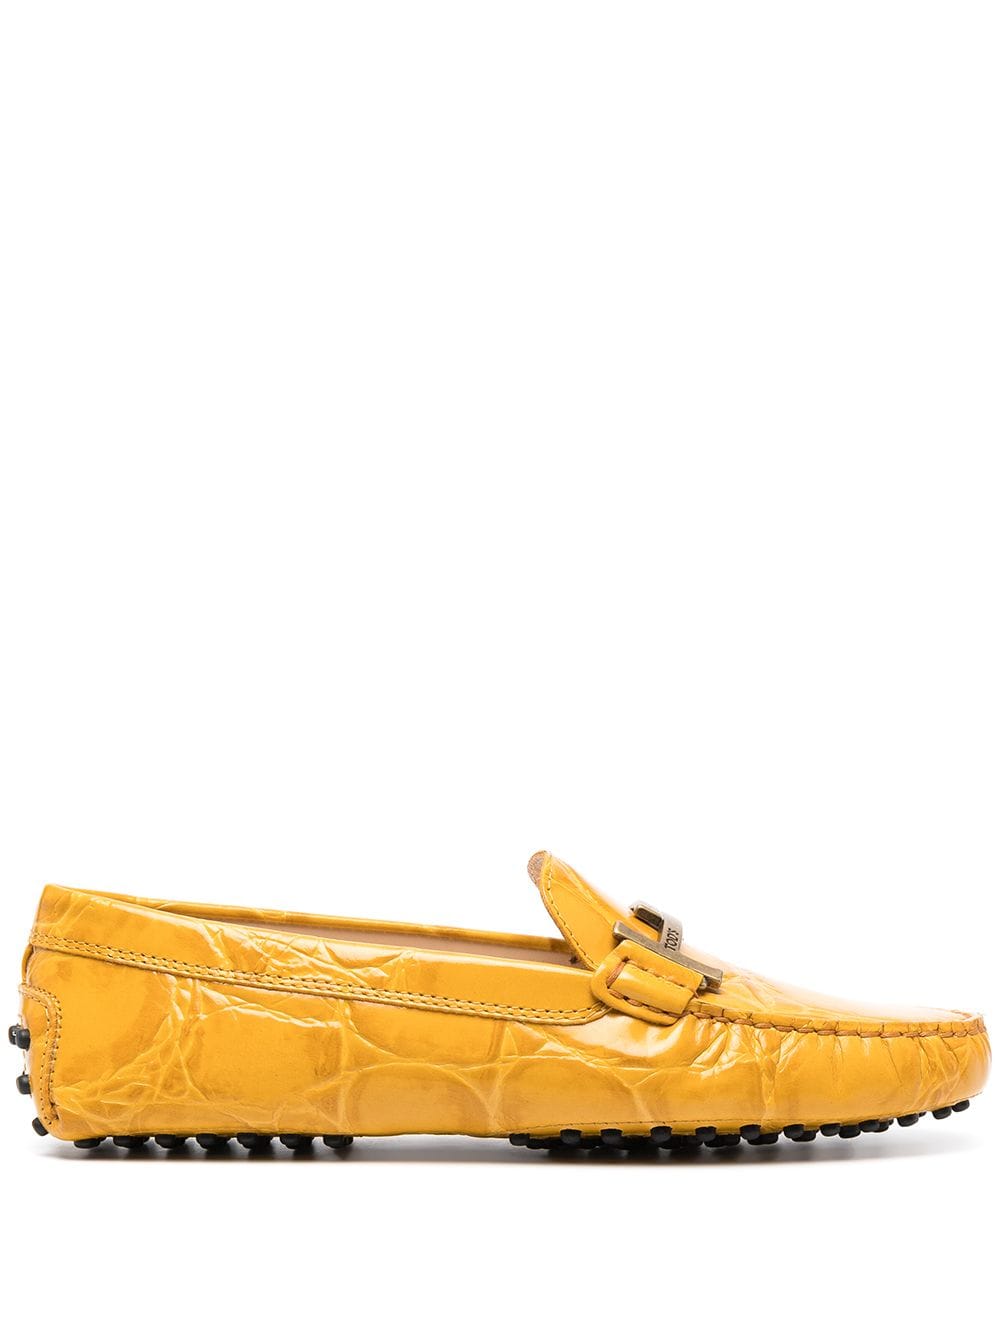 TOD'S CITY GOMMINO LEATHER LOAFERS